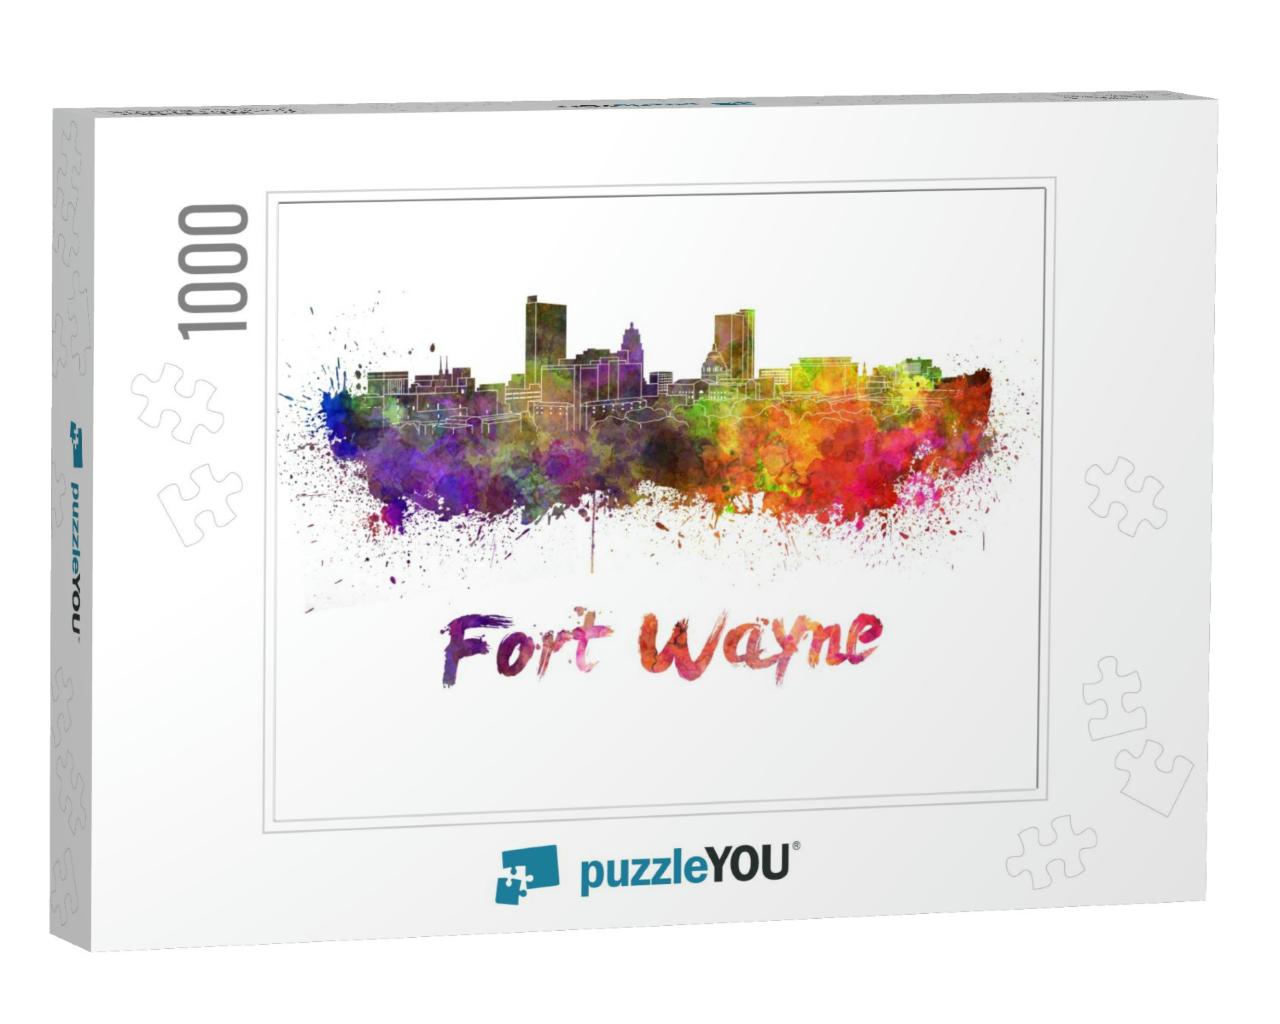 Fort Wayne Skyline in Watercolor Splatters with Clipping... Jigsaw Puzzle with 1000 pieces